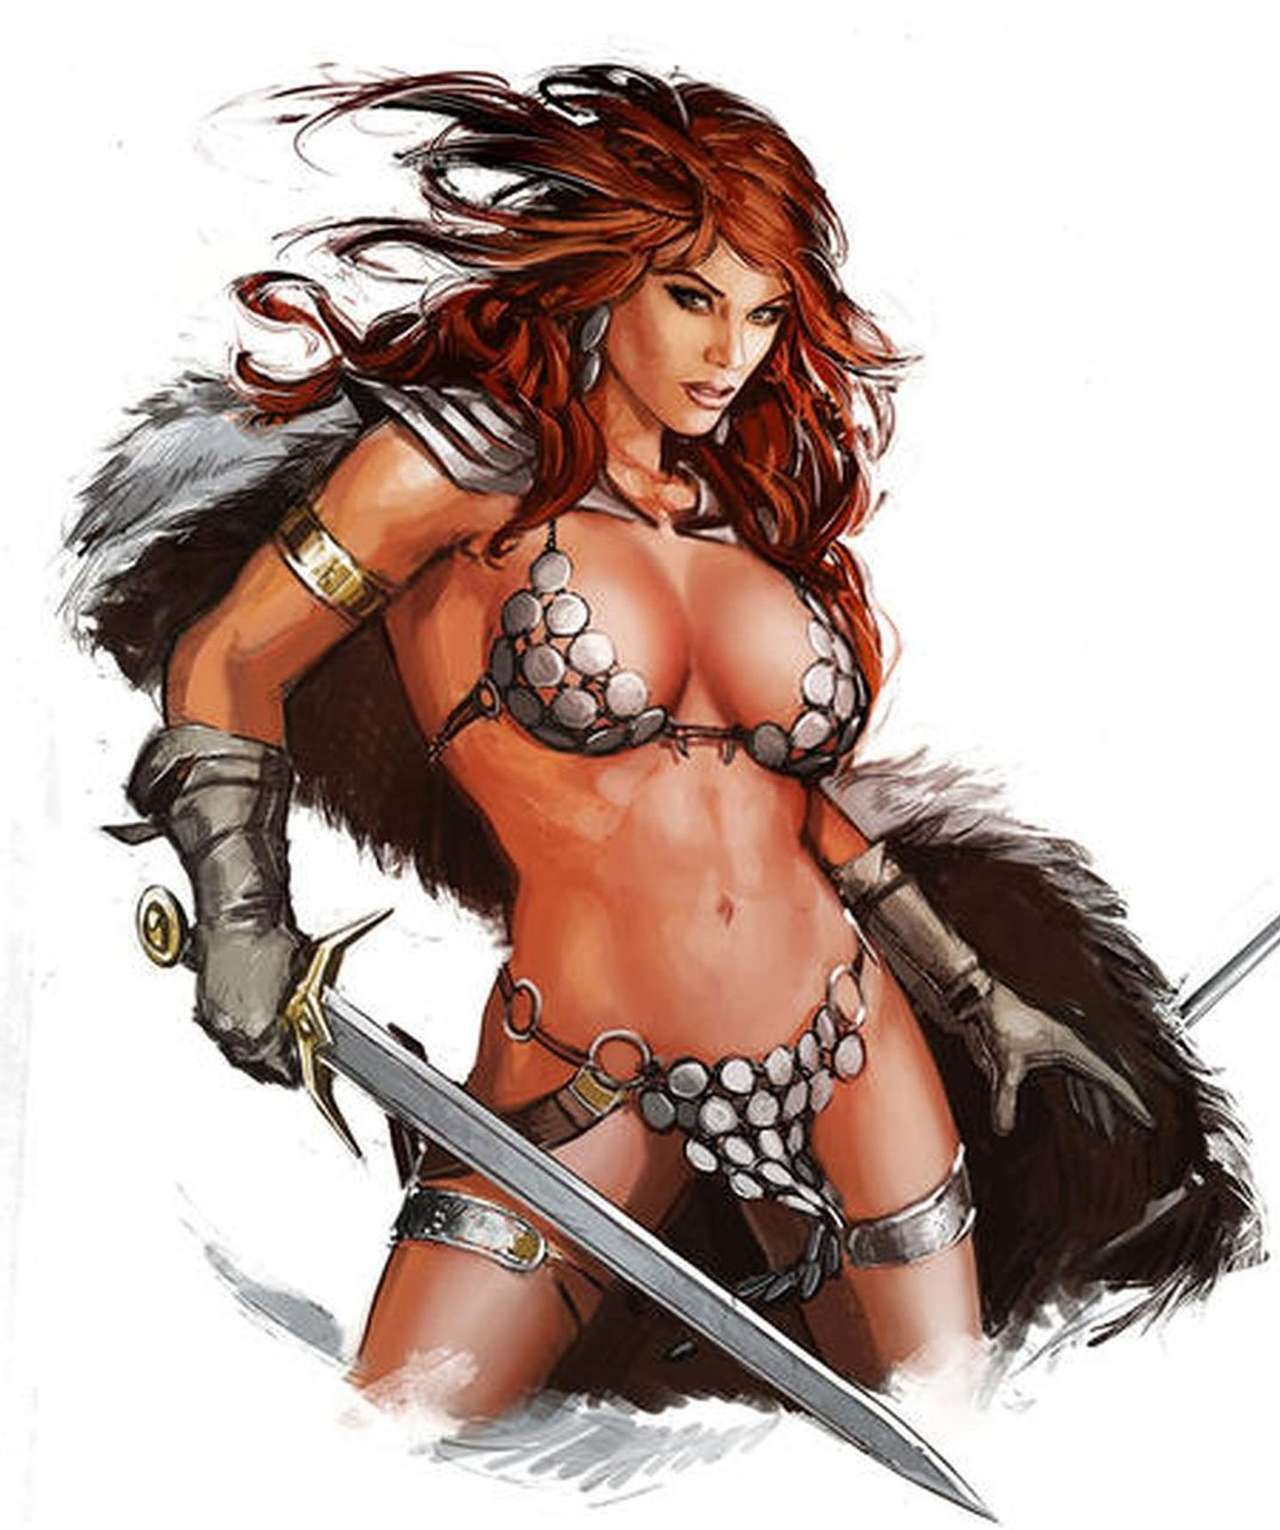 Red Sonja done by Various Artist 18